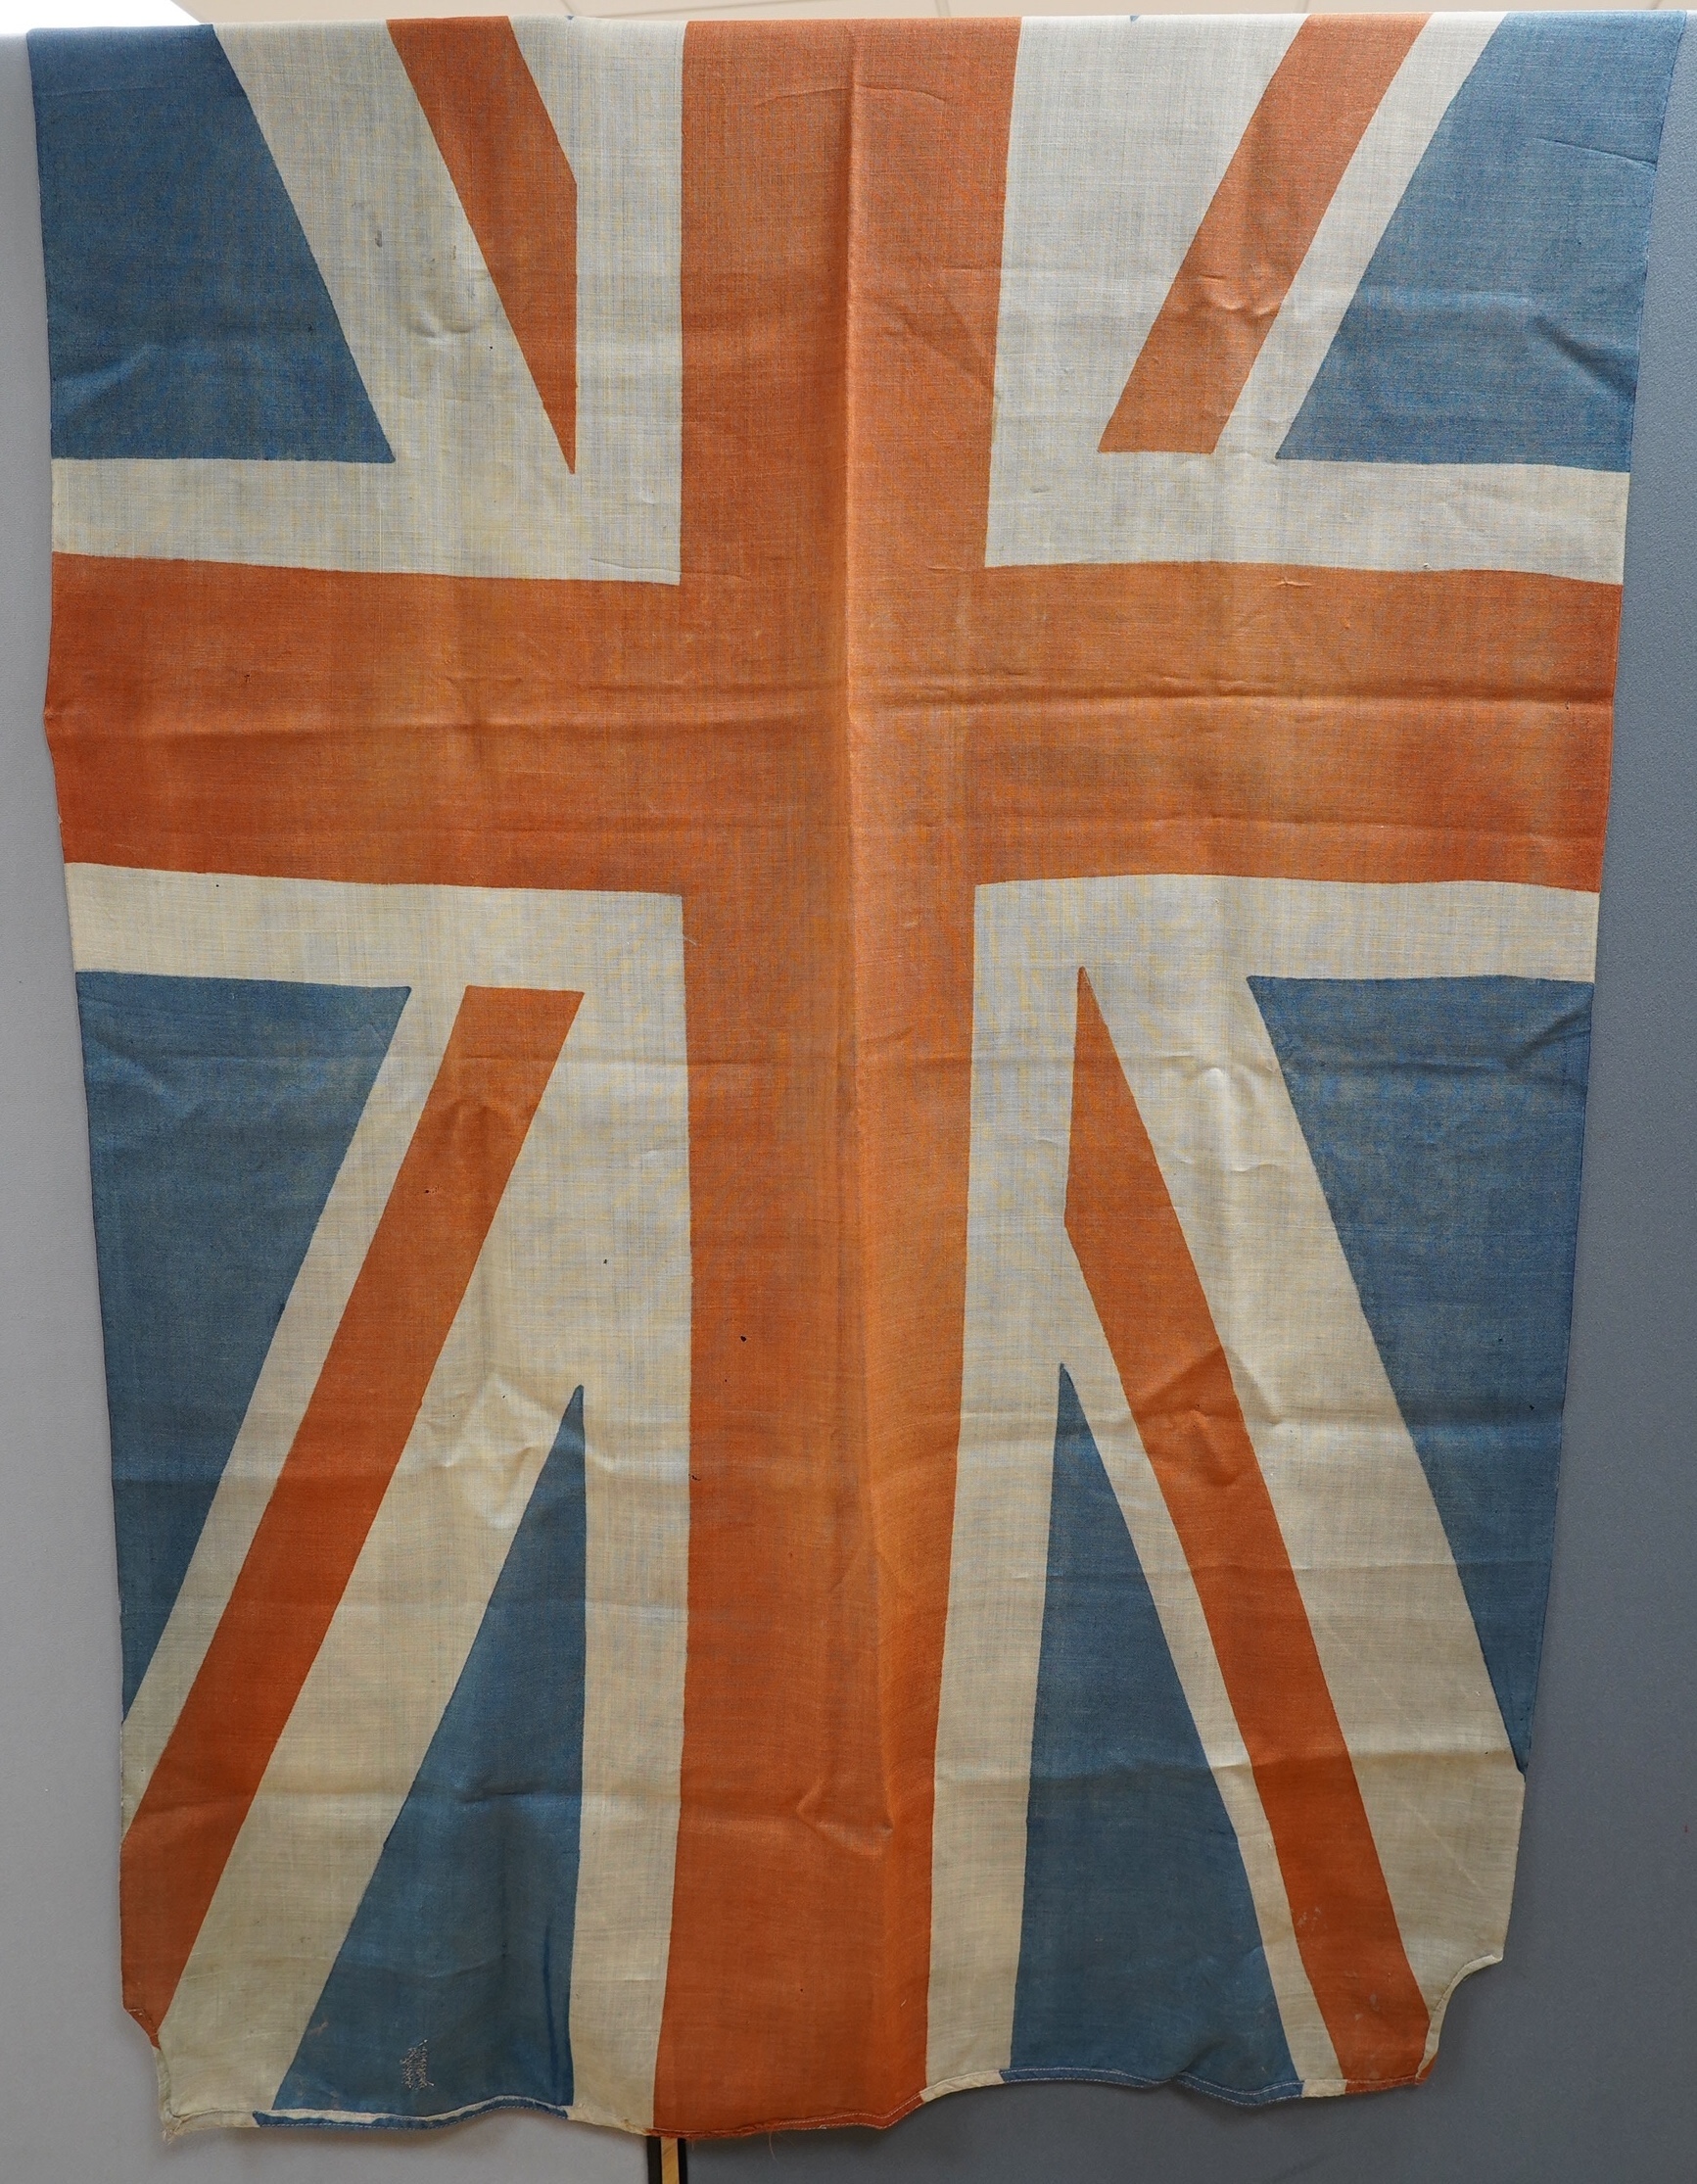 Eight mostly mid 20th century Union Jack flags, one celebrating Queen Victoria’s Diamond Jubilee, together with a Saint George’s cross and a string of Union flag bunting. Condition - poor to good